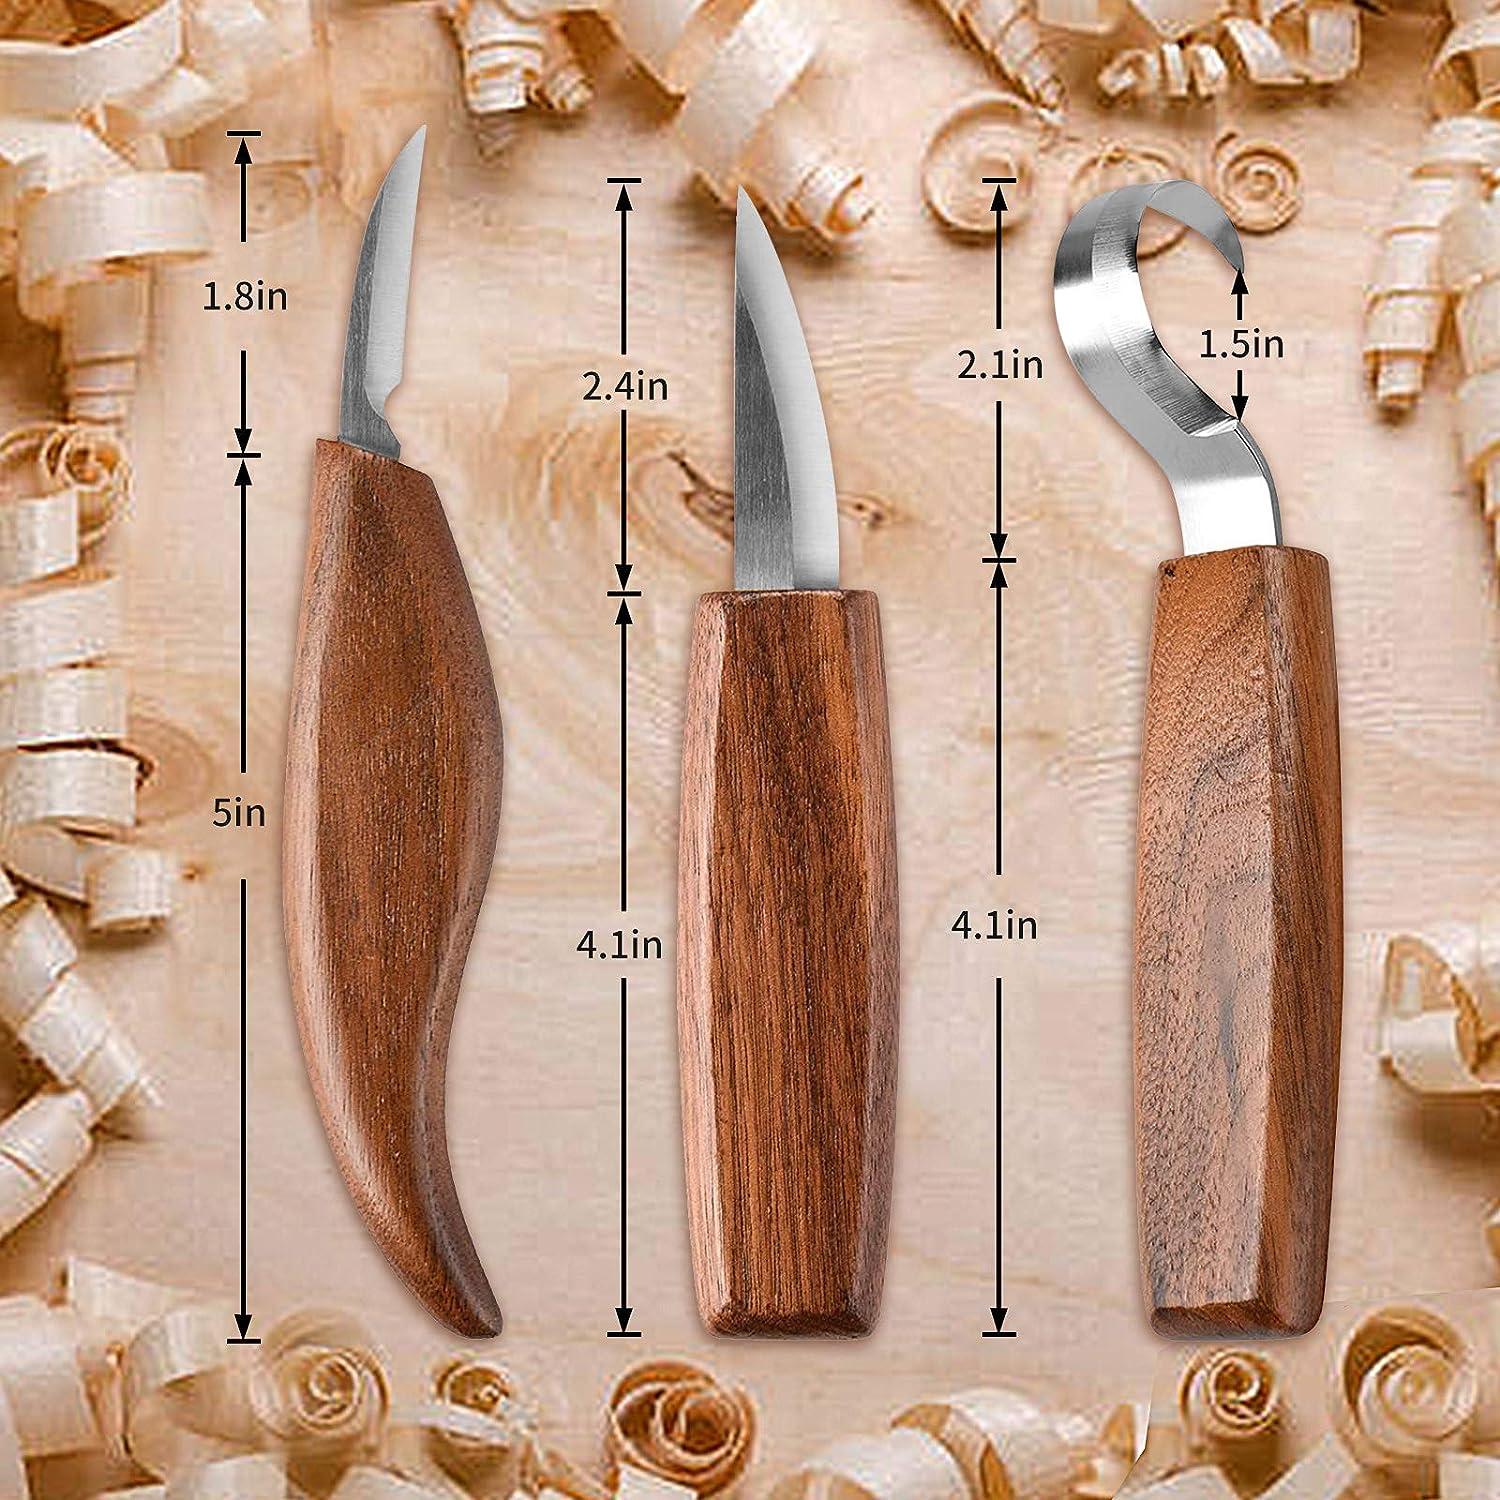 Whittling Wood Carving Kit For Beginners Chip Carving Knife Kit, Wood  Carving Tools For Spoon/Bowl/Cup/Kuksa DIY Craft Woodworking Hobby Kits For  Adul